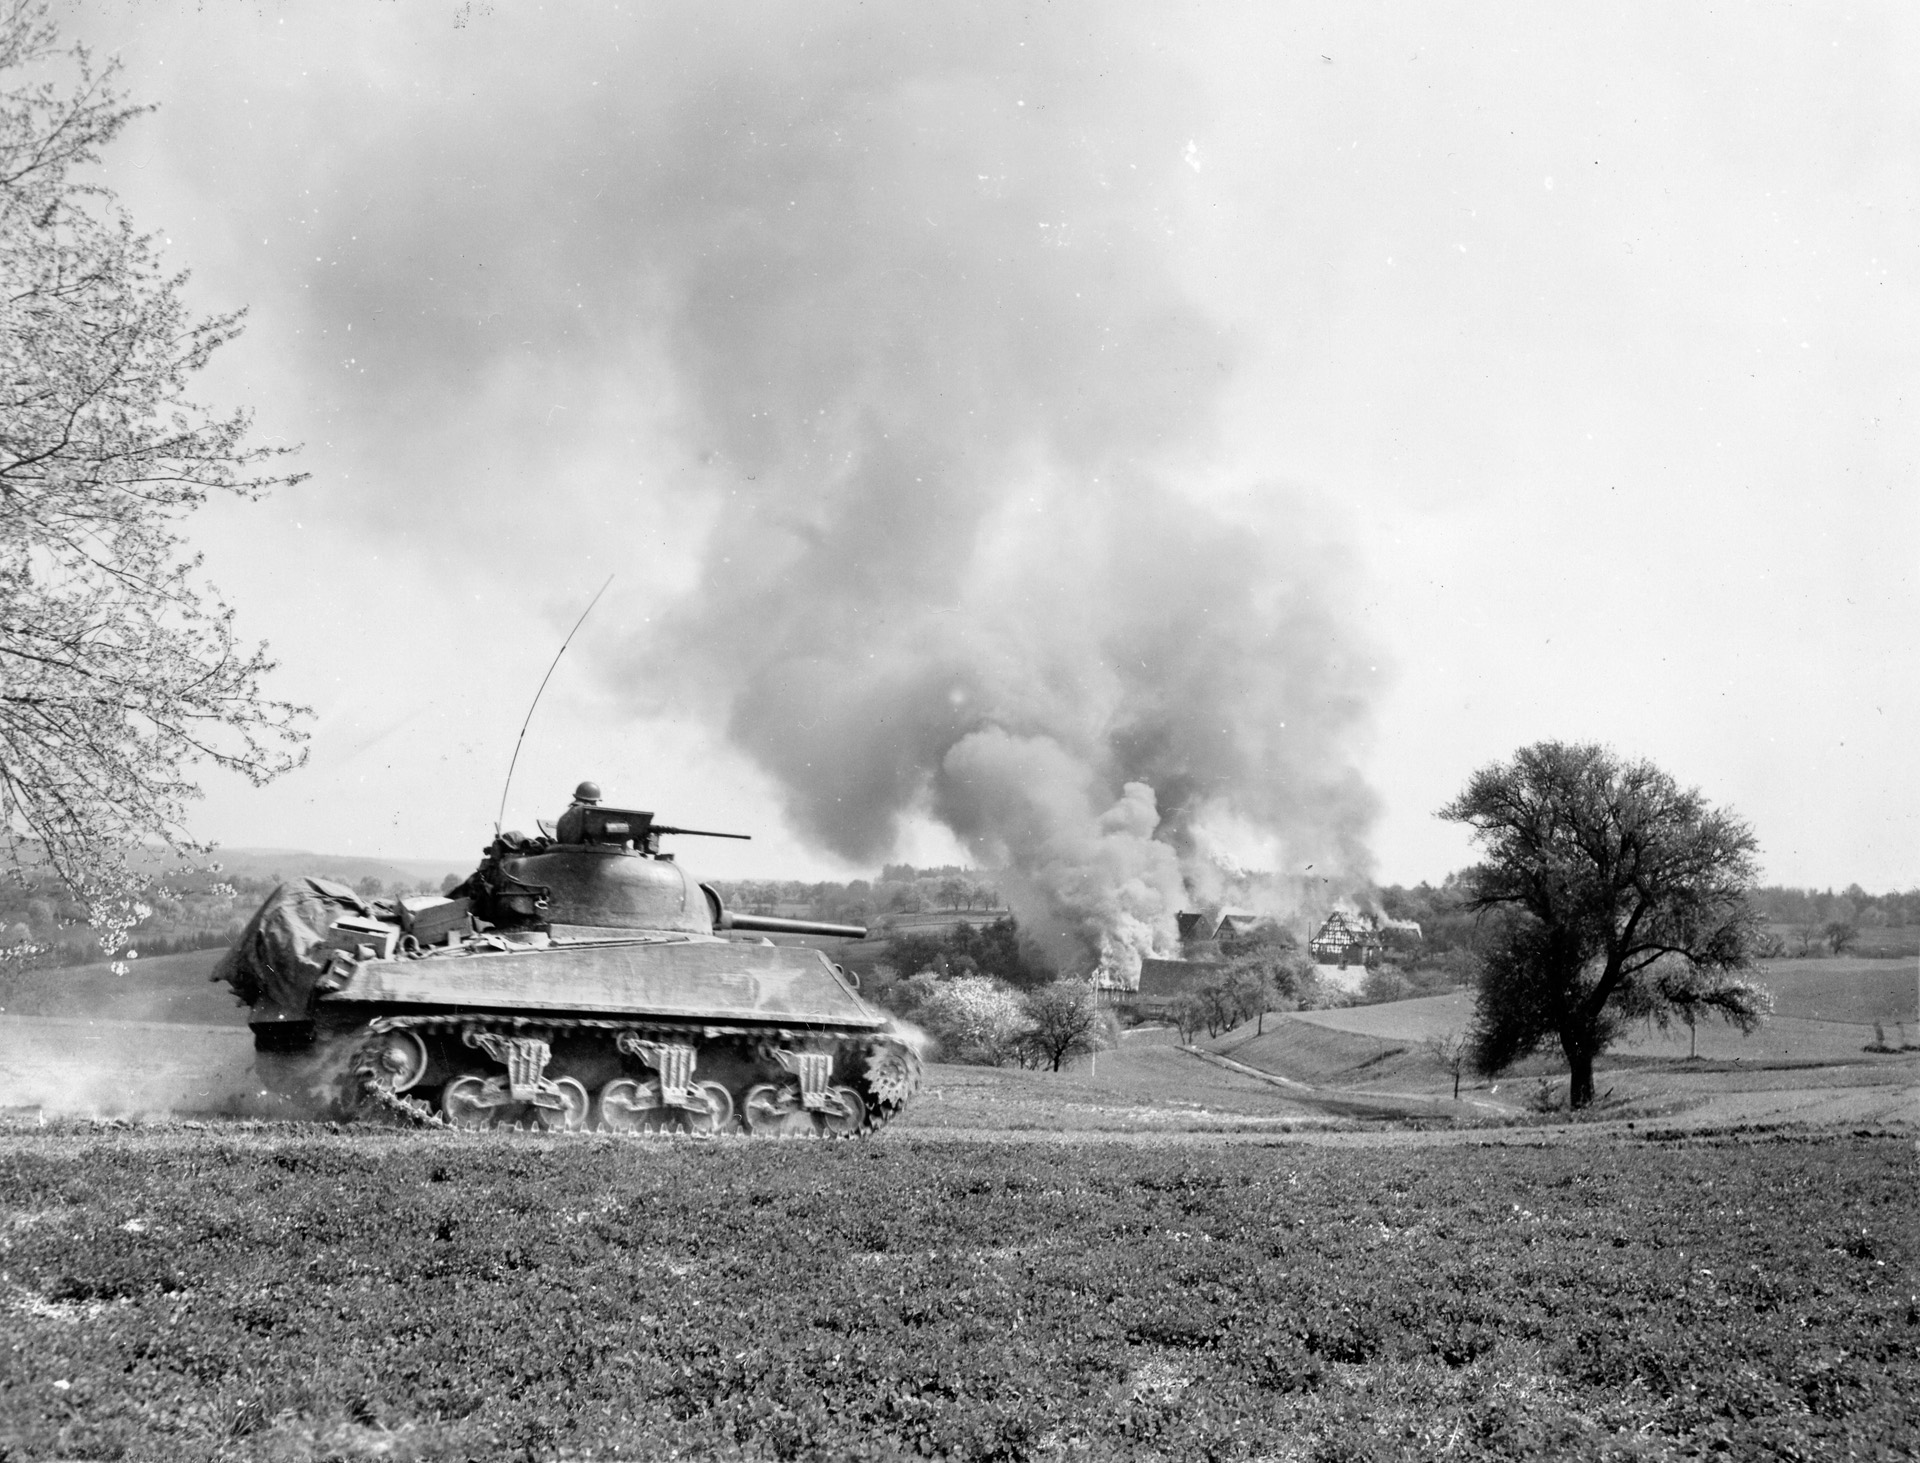 A small German town near Stuttgart goes up in flames as a 21st Tank Battalion Sherman dashes eastward.